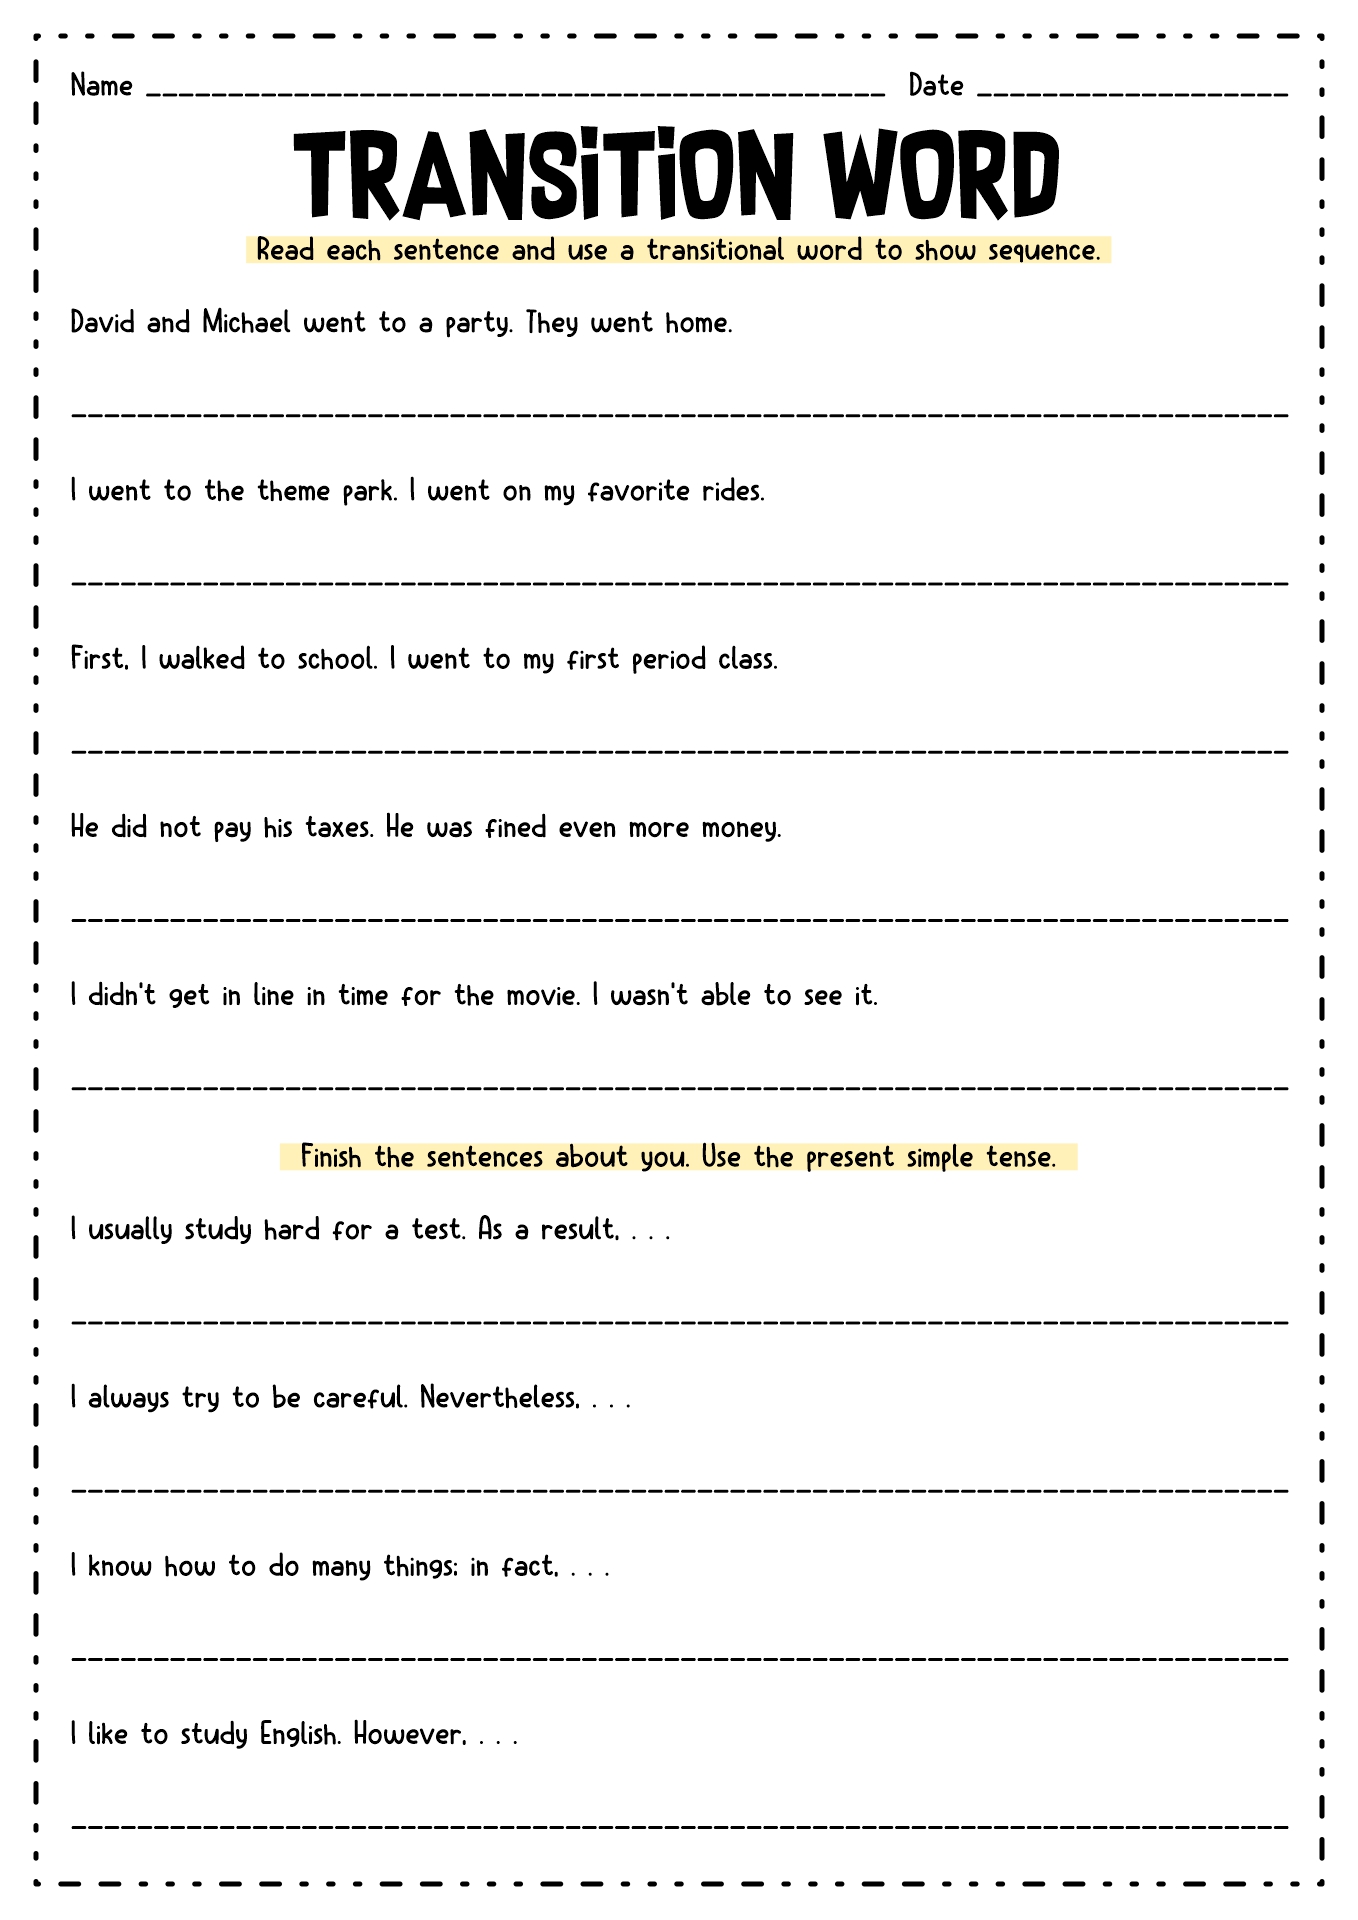 16-best-images-of-worksheets-transition-words-and-phrases-transition-word-list-transition